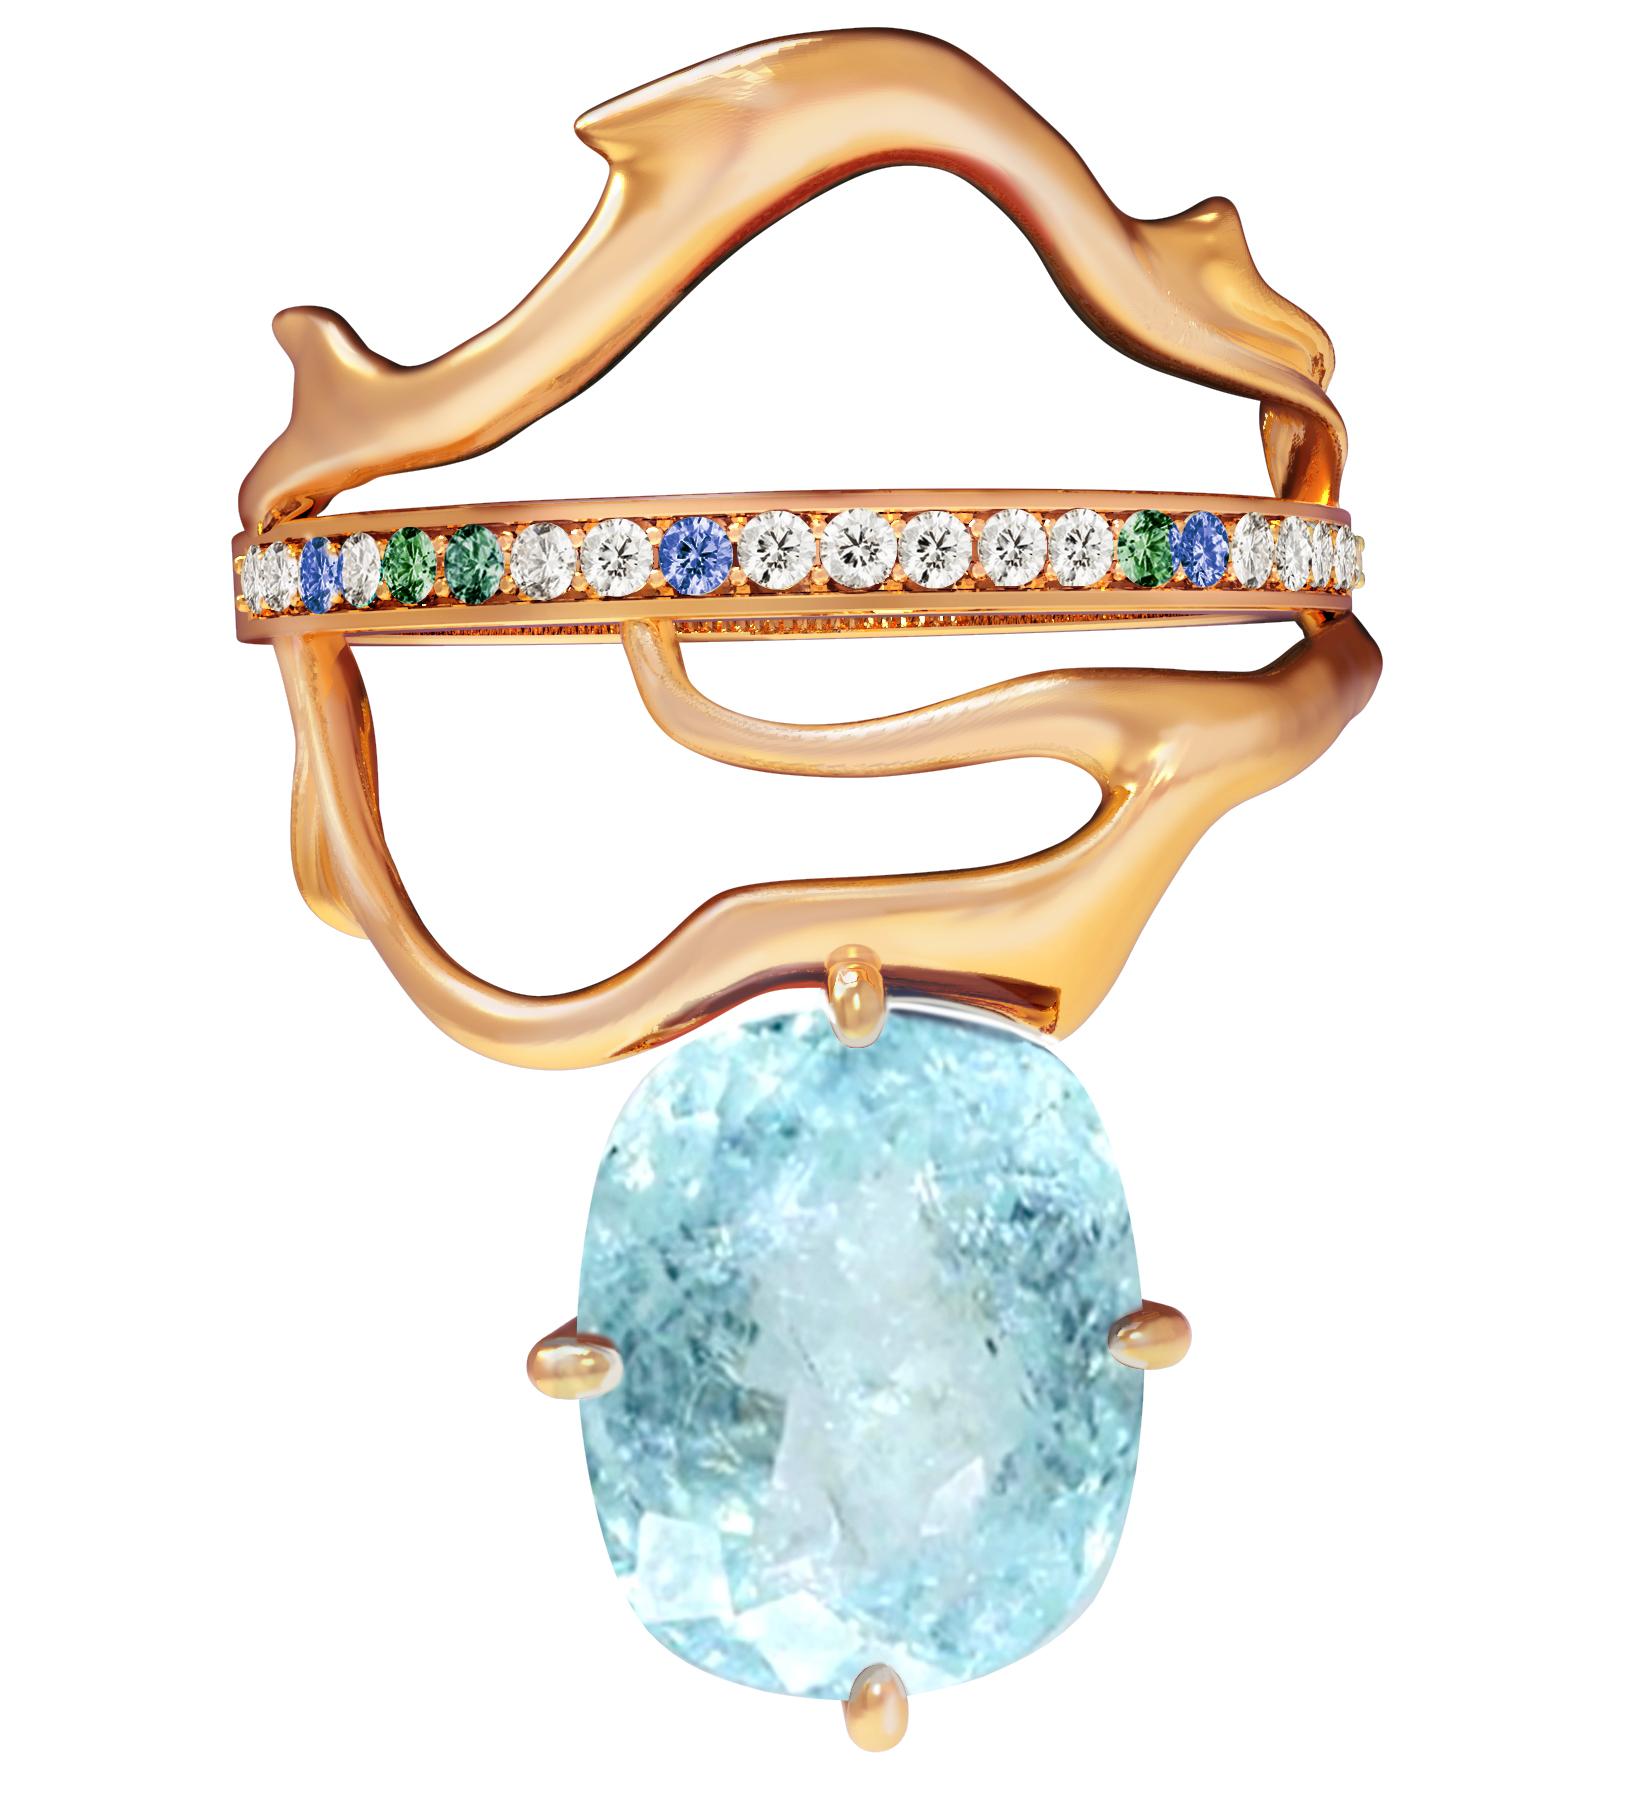 An unusual form makes this Tibetan 18 karat rose gold contemporary ring an art object. It is encrusted with: emeralds, blue sapphires, diamonds, and oval cut paraiba tourmaline  (neon copper bearing, 2,4 carats, blue with inclusions). Size is custom